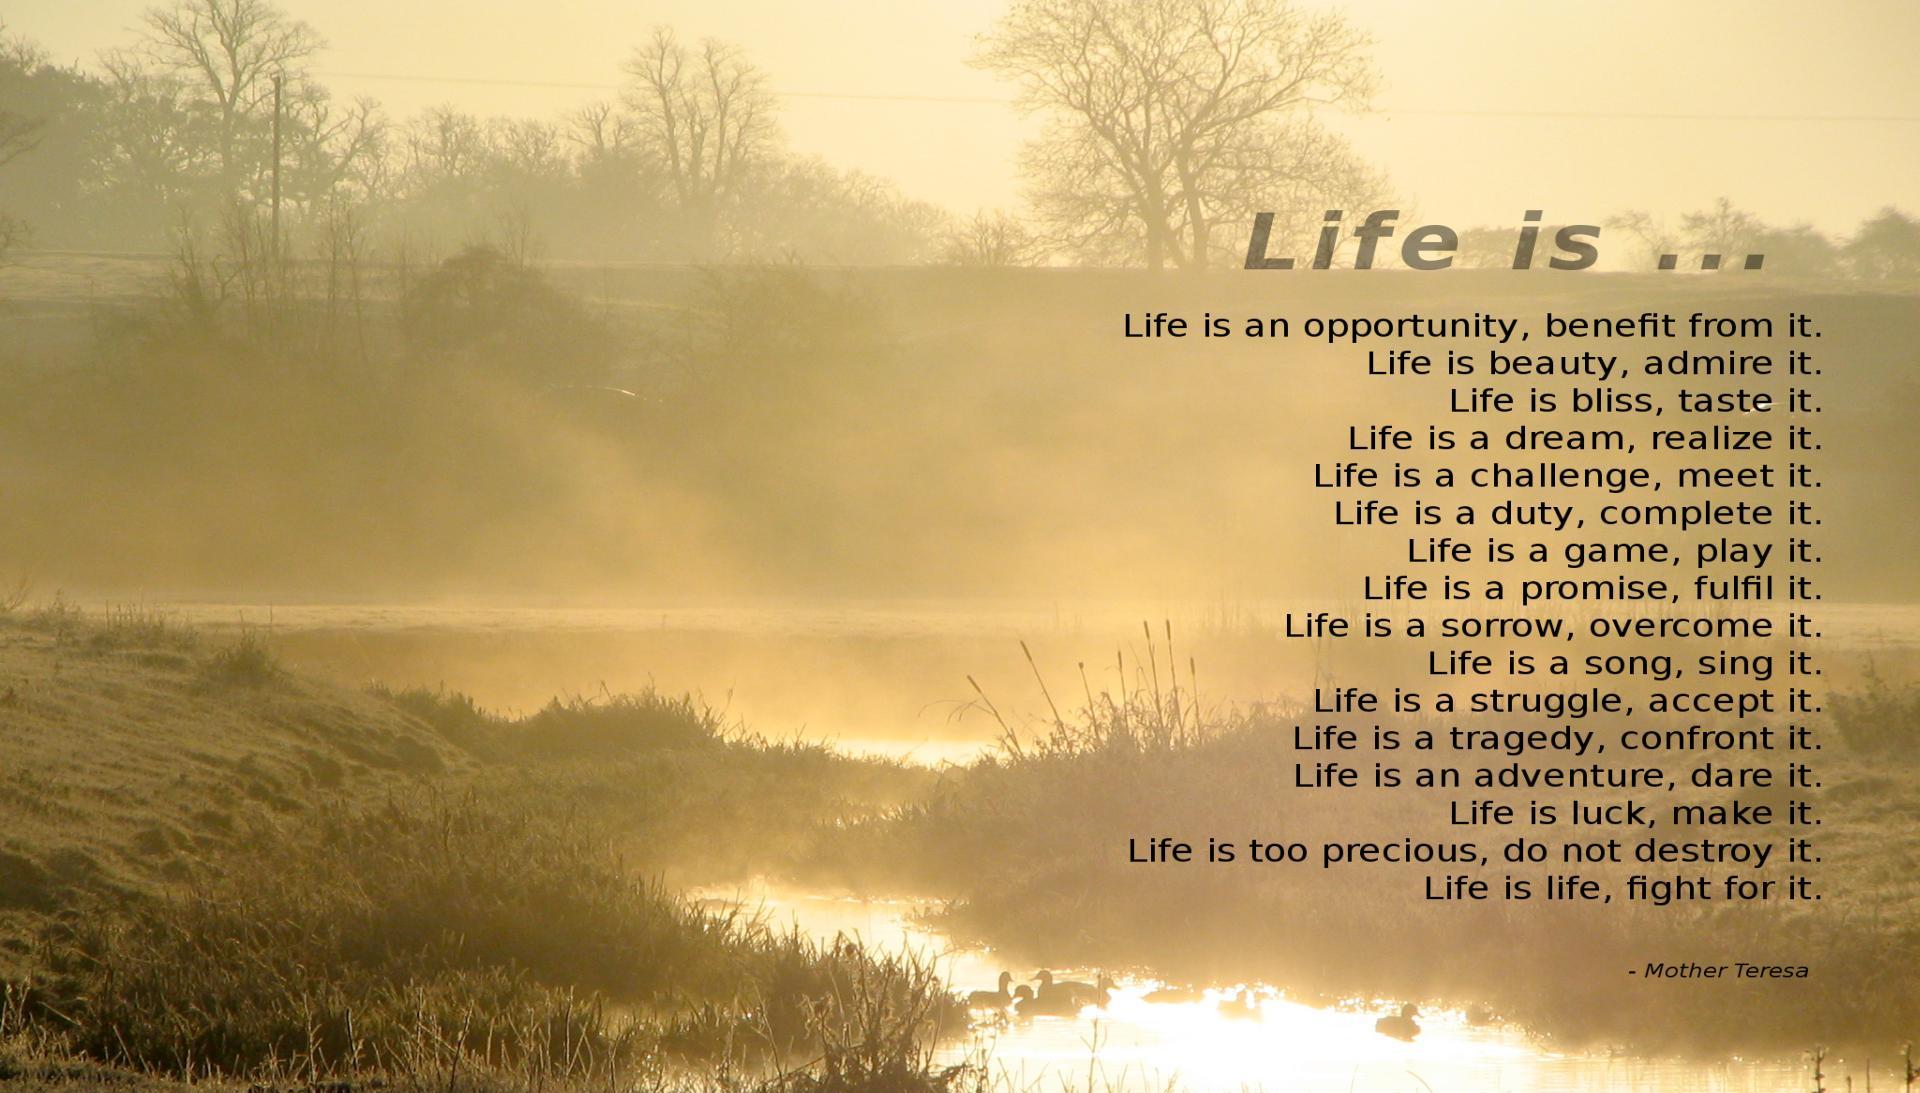 Motivational wallpaper With Life Quotes By Mother Teresa. Dont